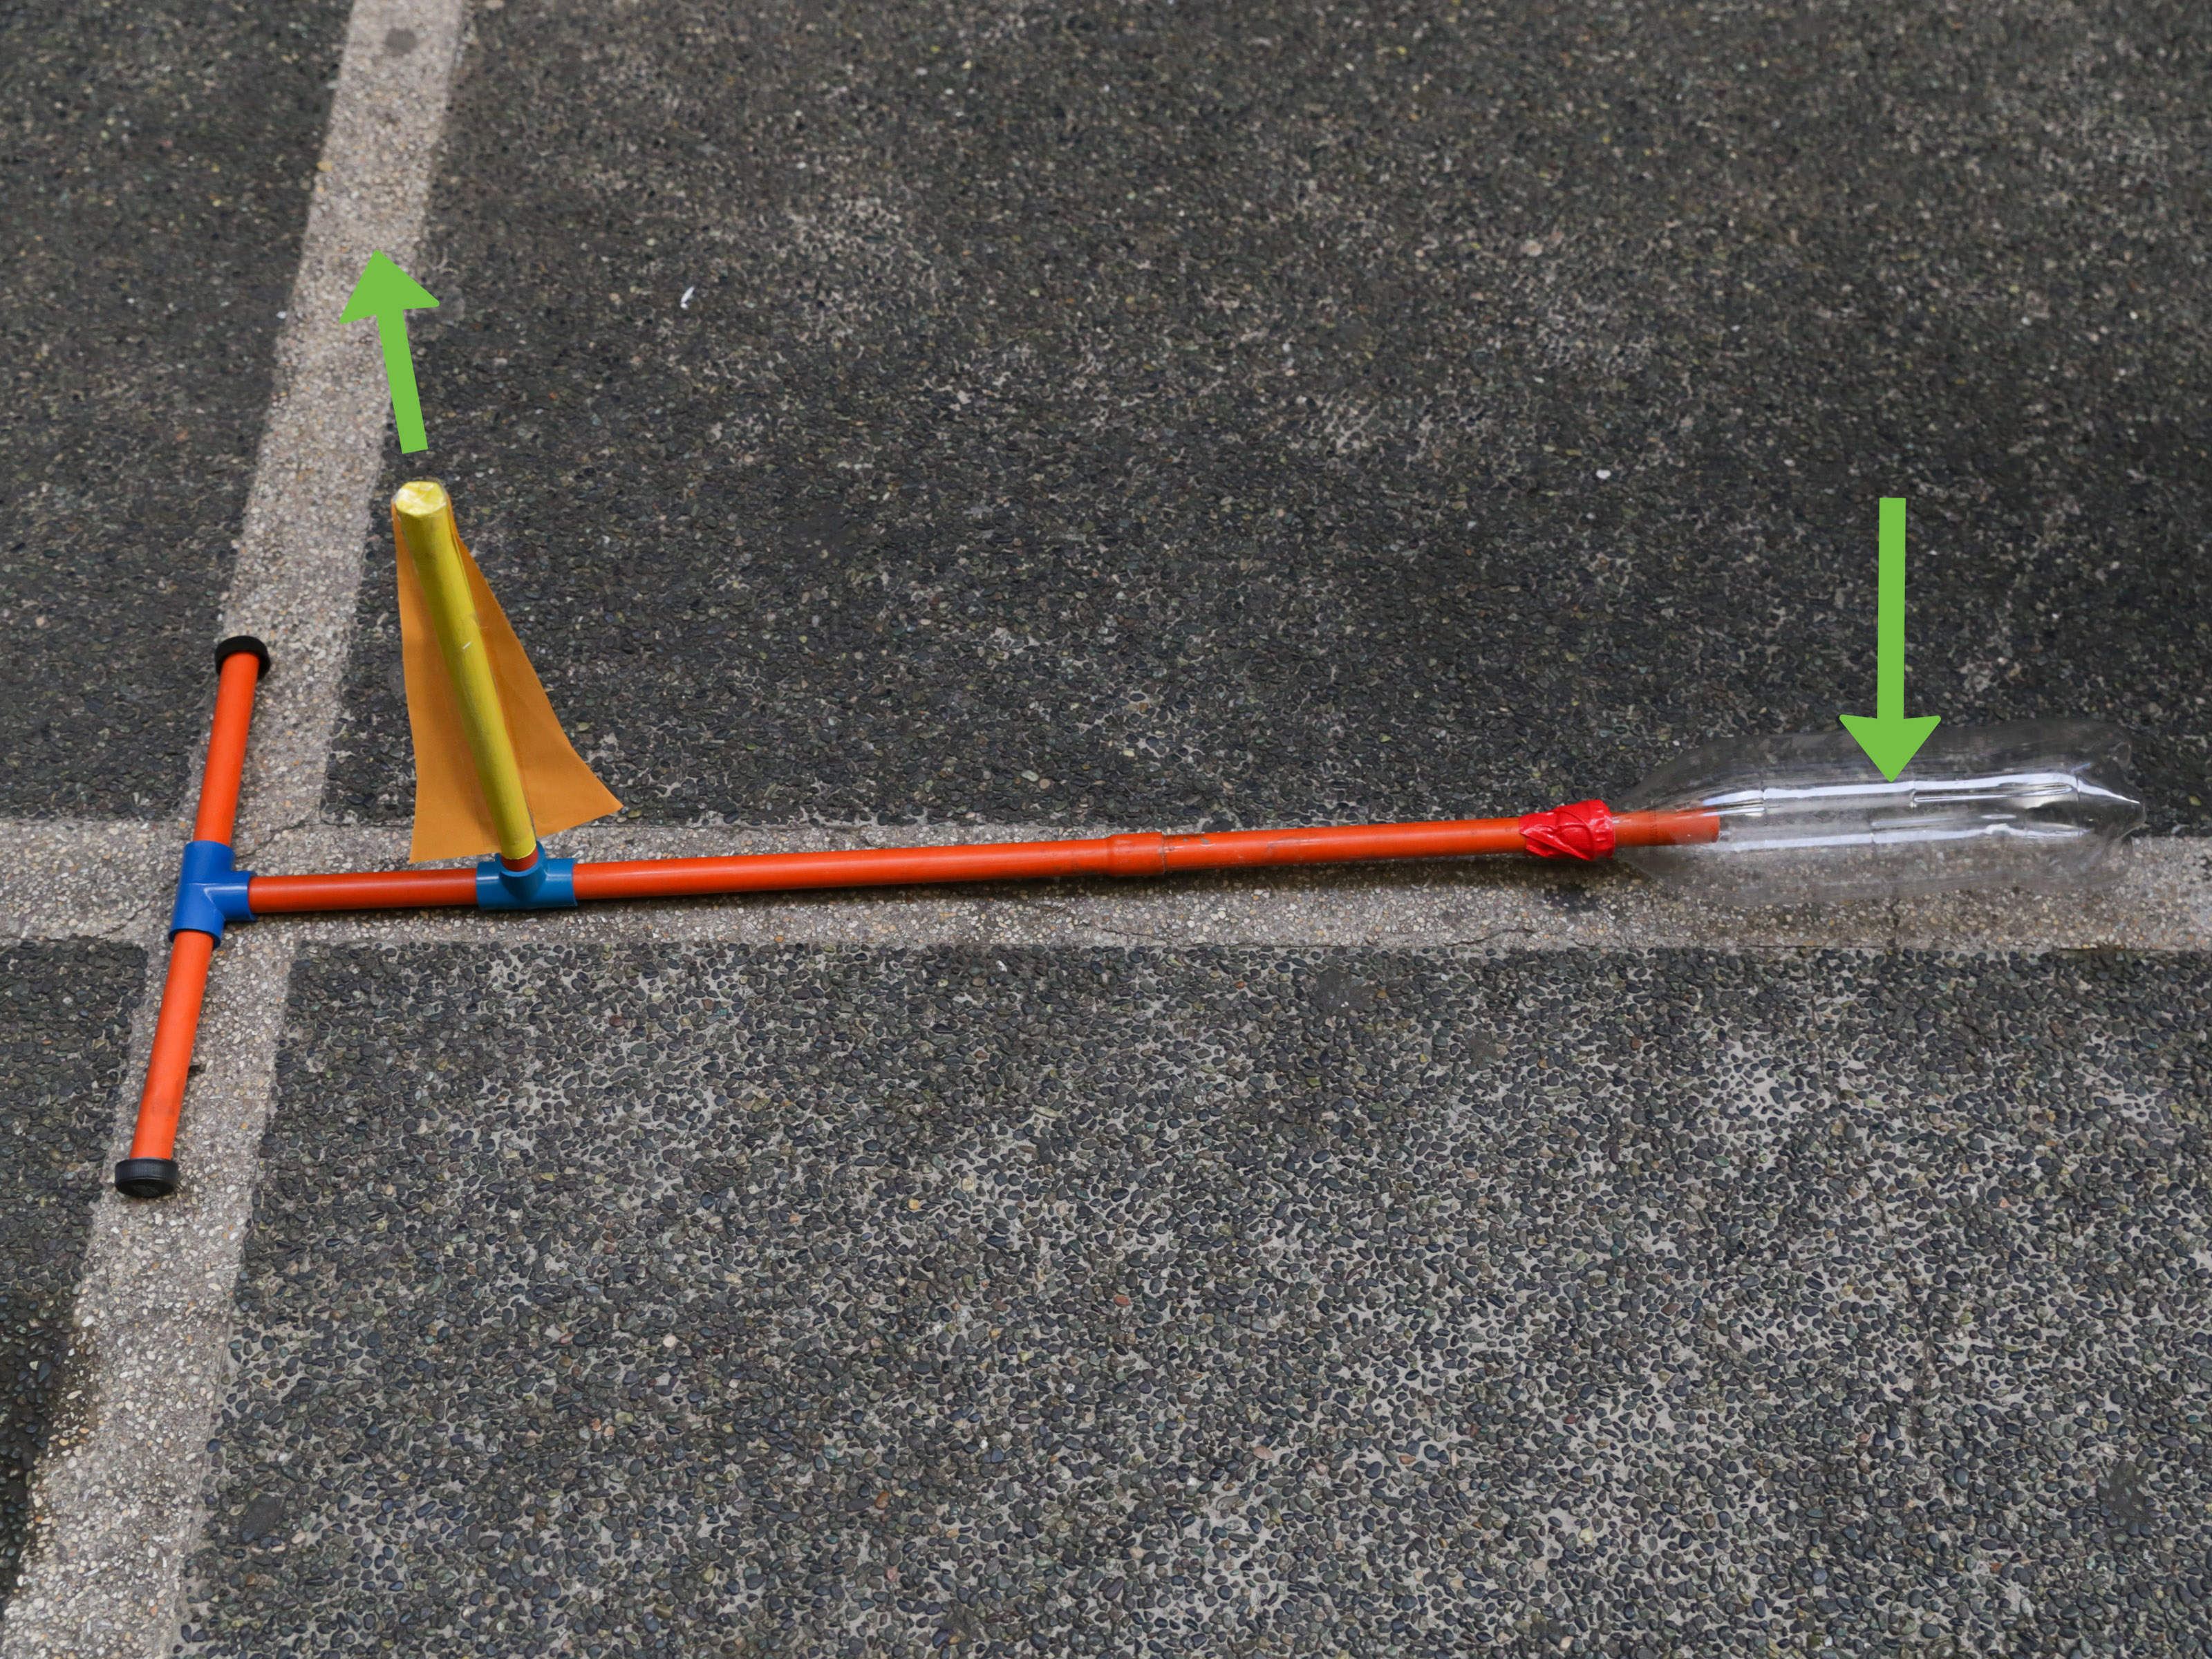 How to Make a Far Flying Paper Rocket